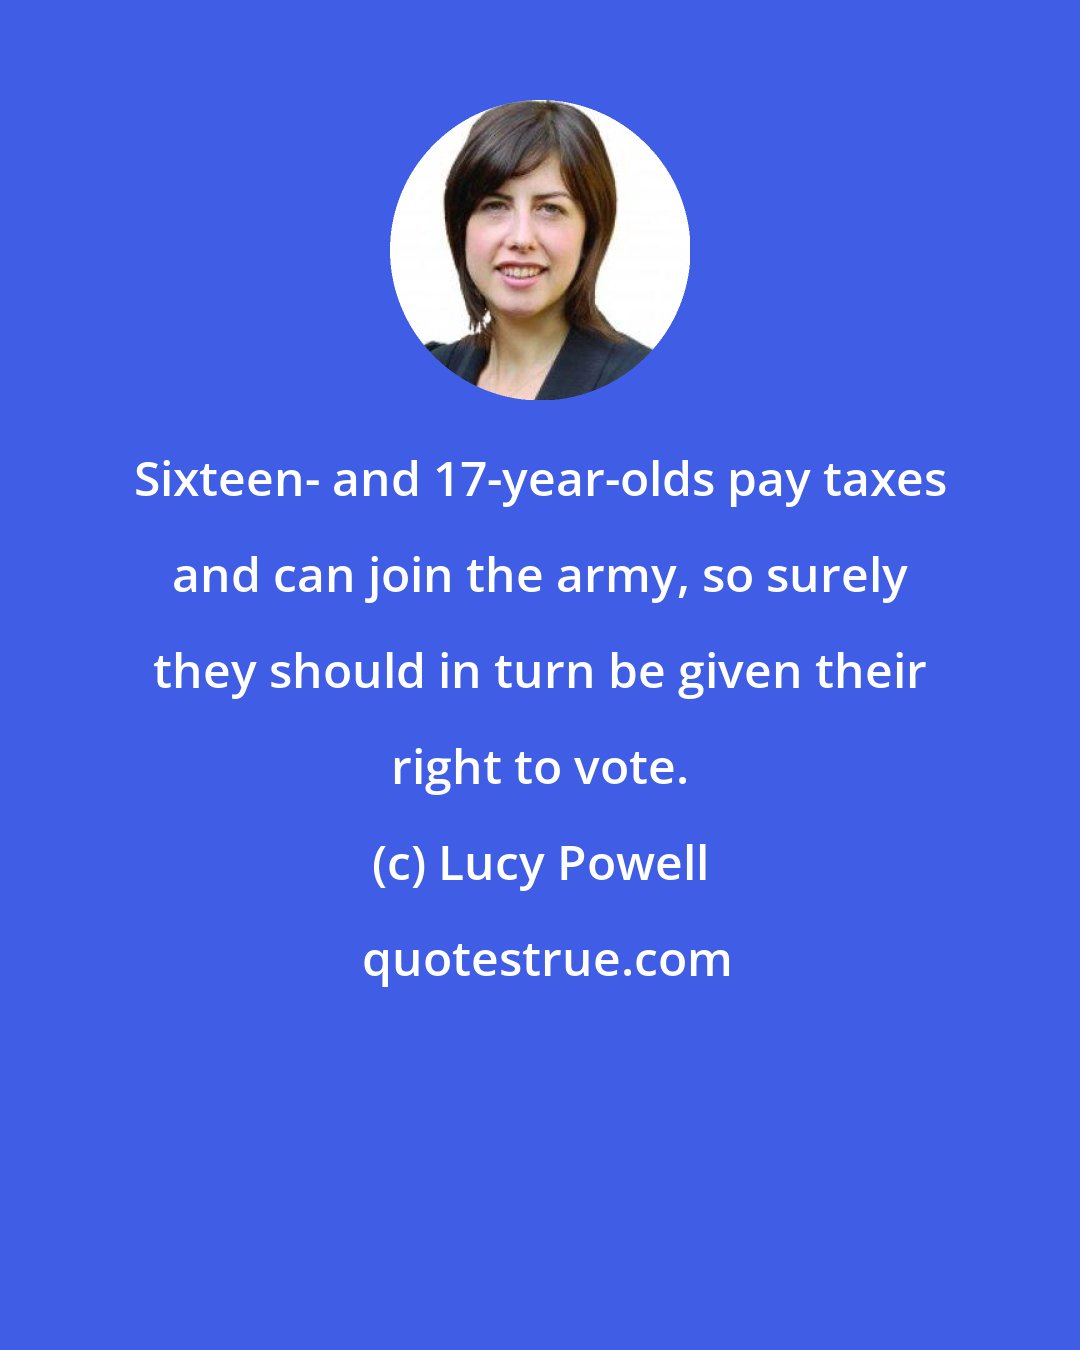 Lucy Powell: Sixteen- and 17-year-olds pay taxes and can join the army, so surely they should in turn be given their right to vote.